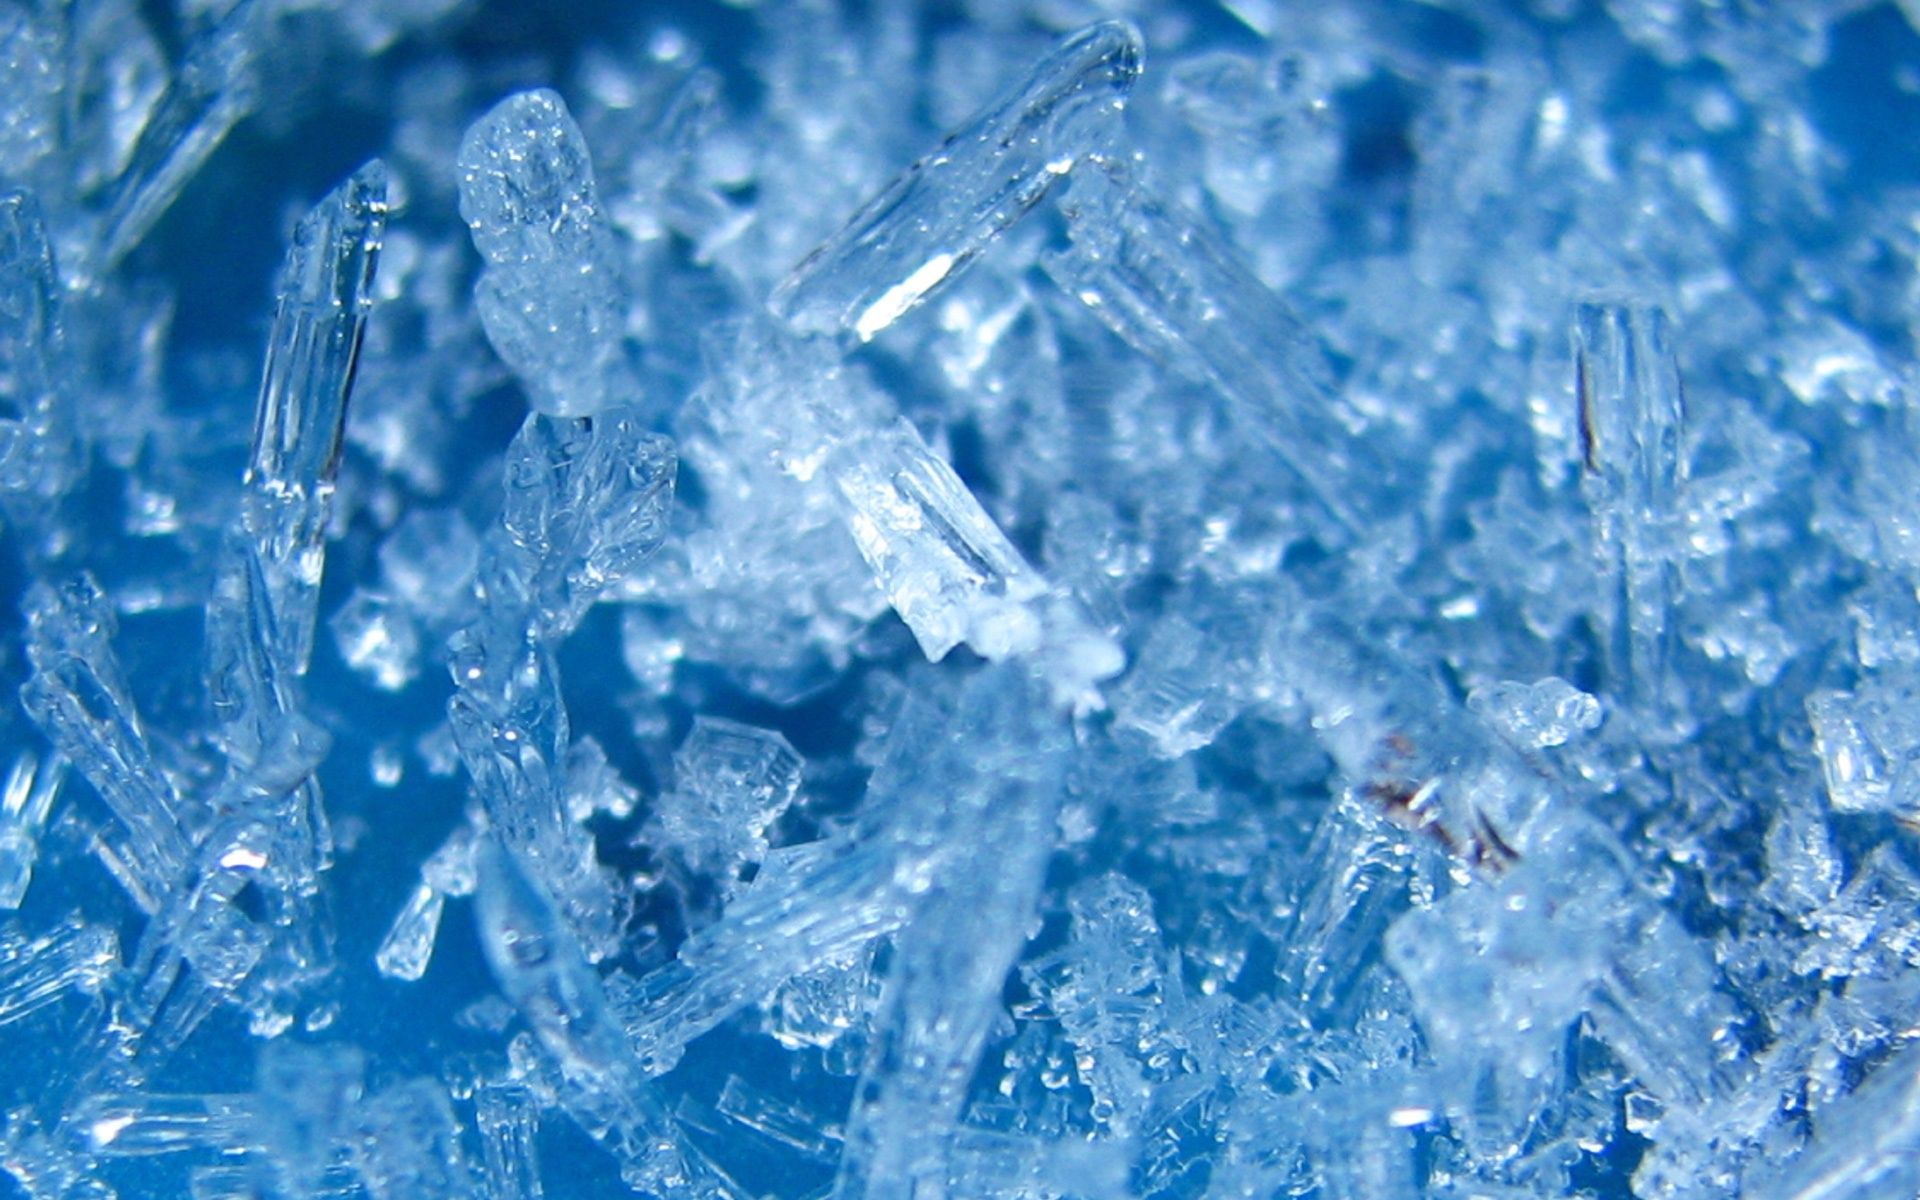 ice crystals. Ice crystals 1920x1200 wallpaper download. Ice aesthetic, Wallpaper, Snow crystal